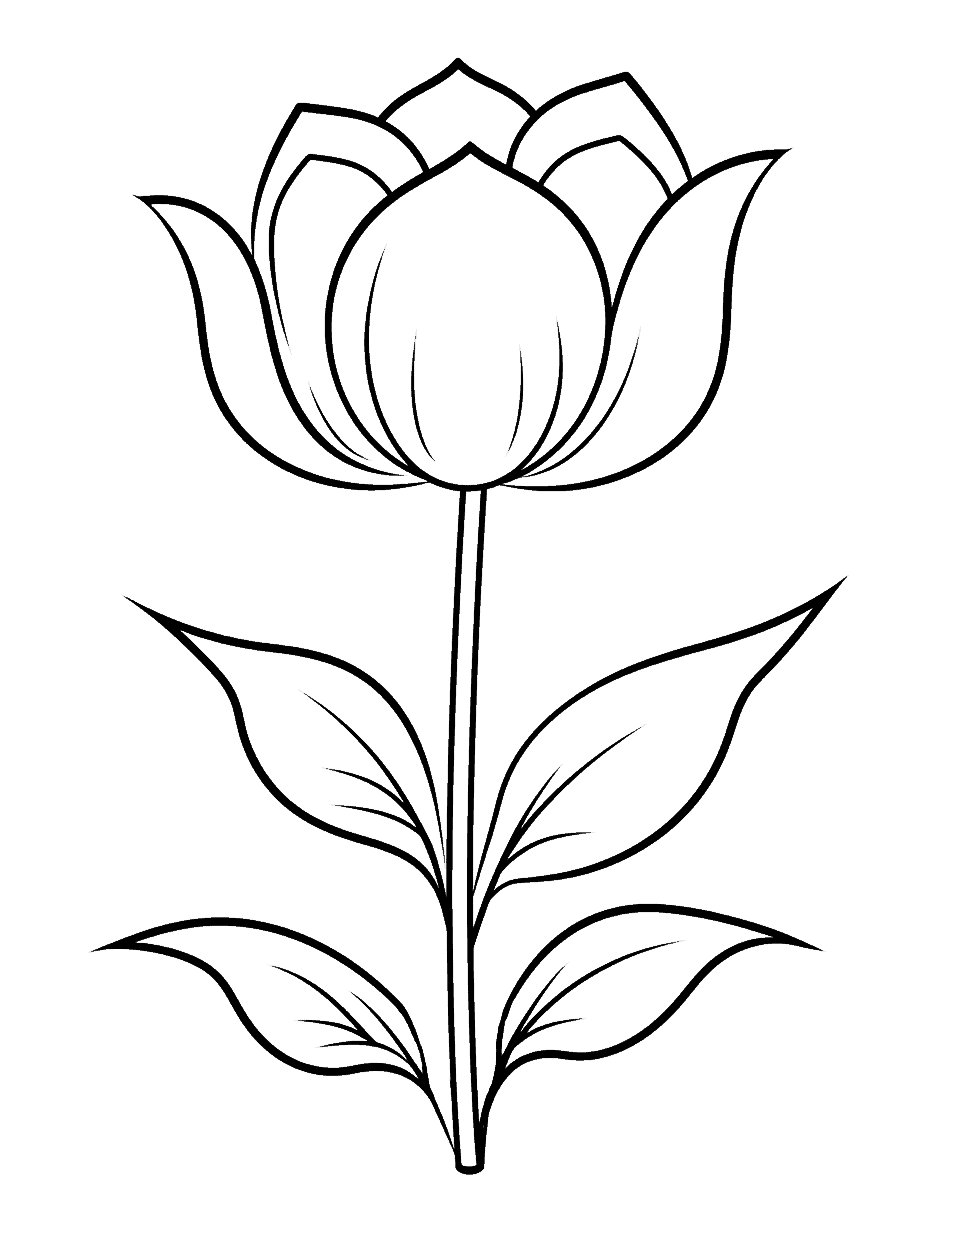 Easy Tulip for Preschool Flower Coloring Page - A large, easy-to-color tulip for young kids.